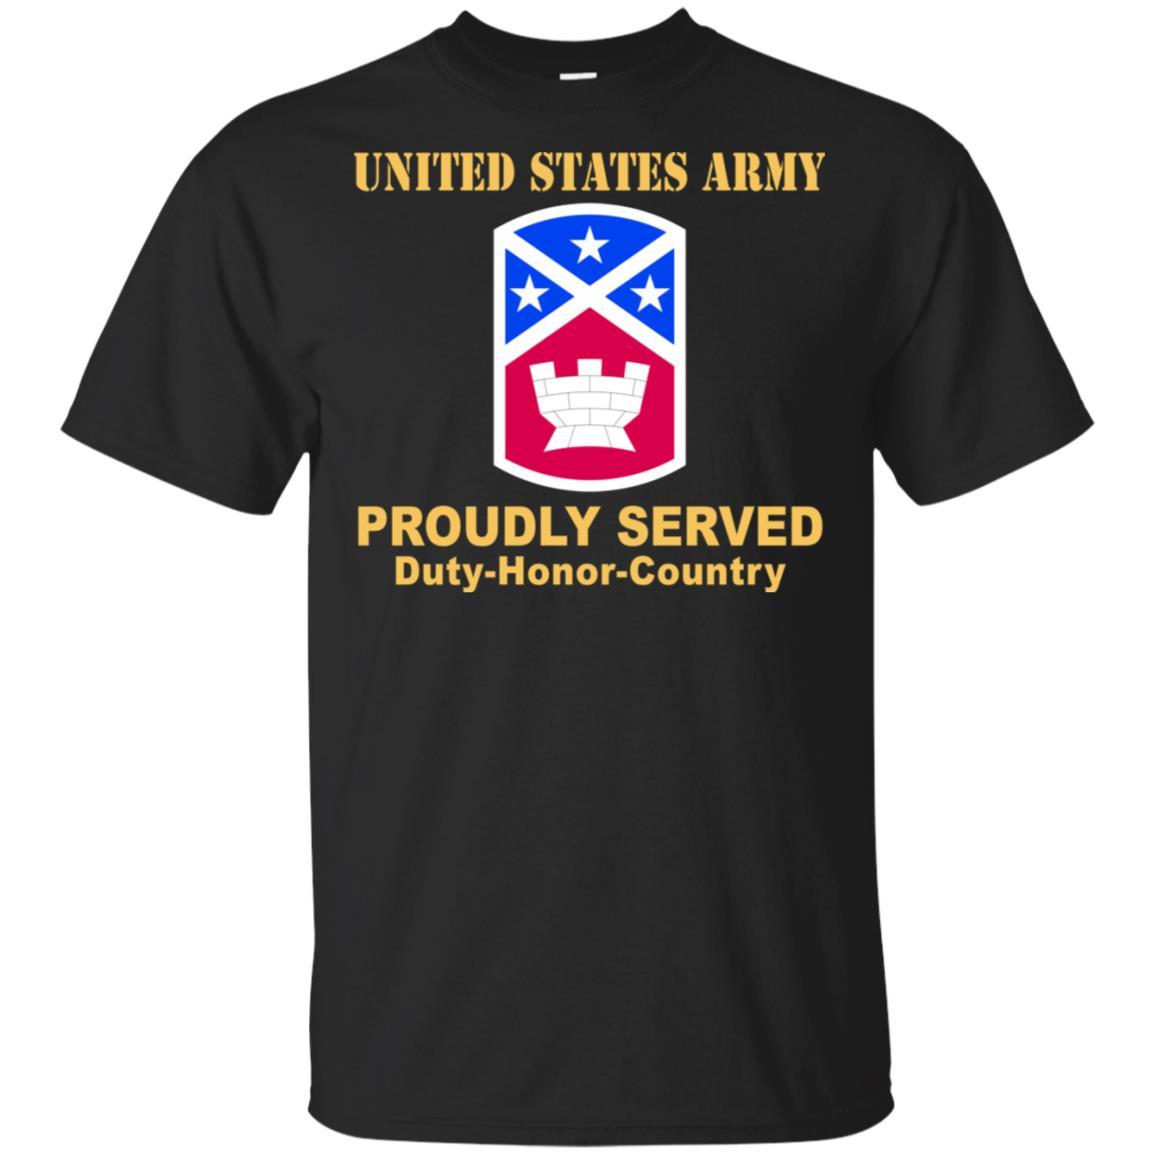 US ARMY 194TH ENGINEER BRIGADE - Proudly Served T-Shirt On Front For Men-TShirt-Army-Veterans Nation